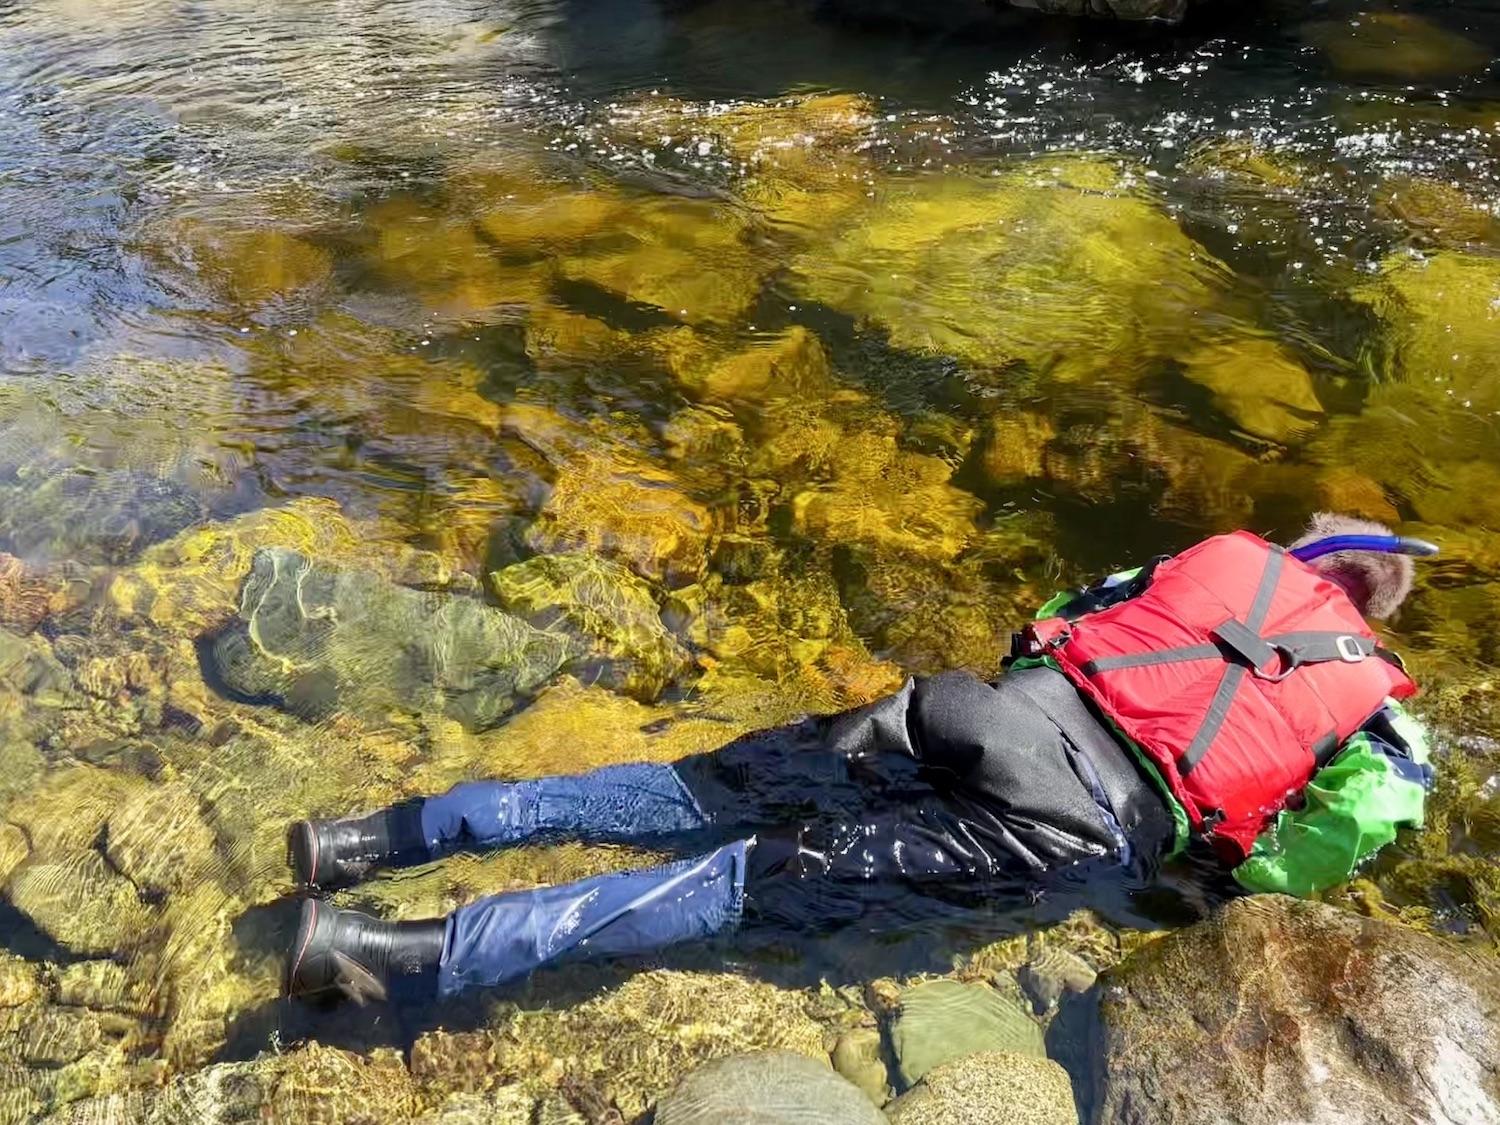 John Robinson searches for salmon in the shallow, clear waters of the Upper Salmon River.